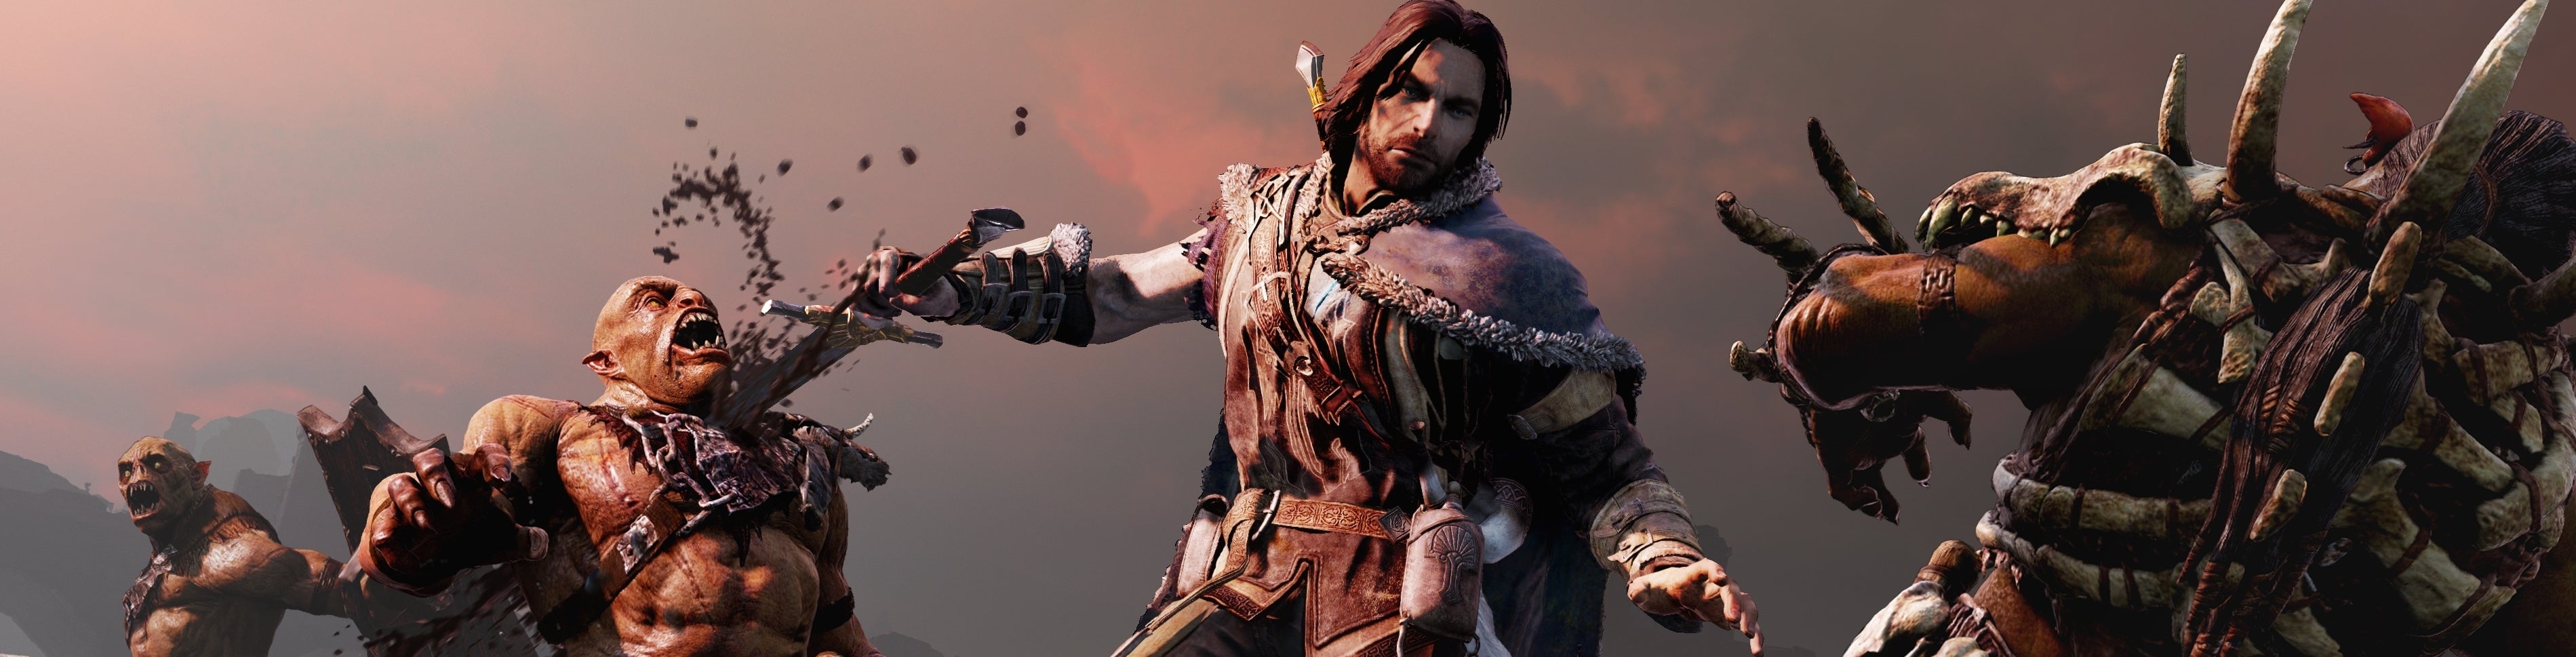 Image for Middle-Earth: Shadow of Mordor na PS3/X360 osekané